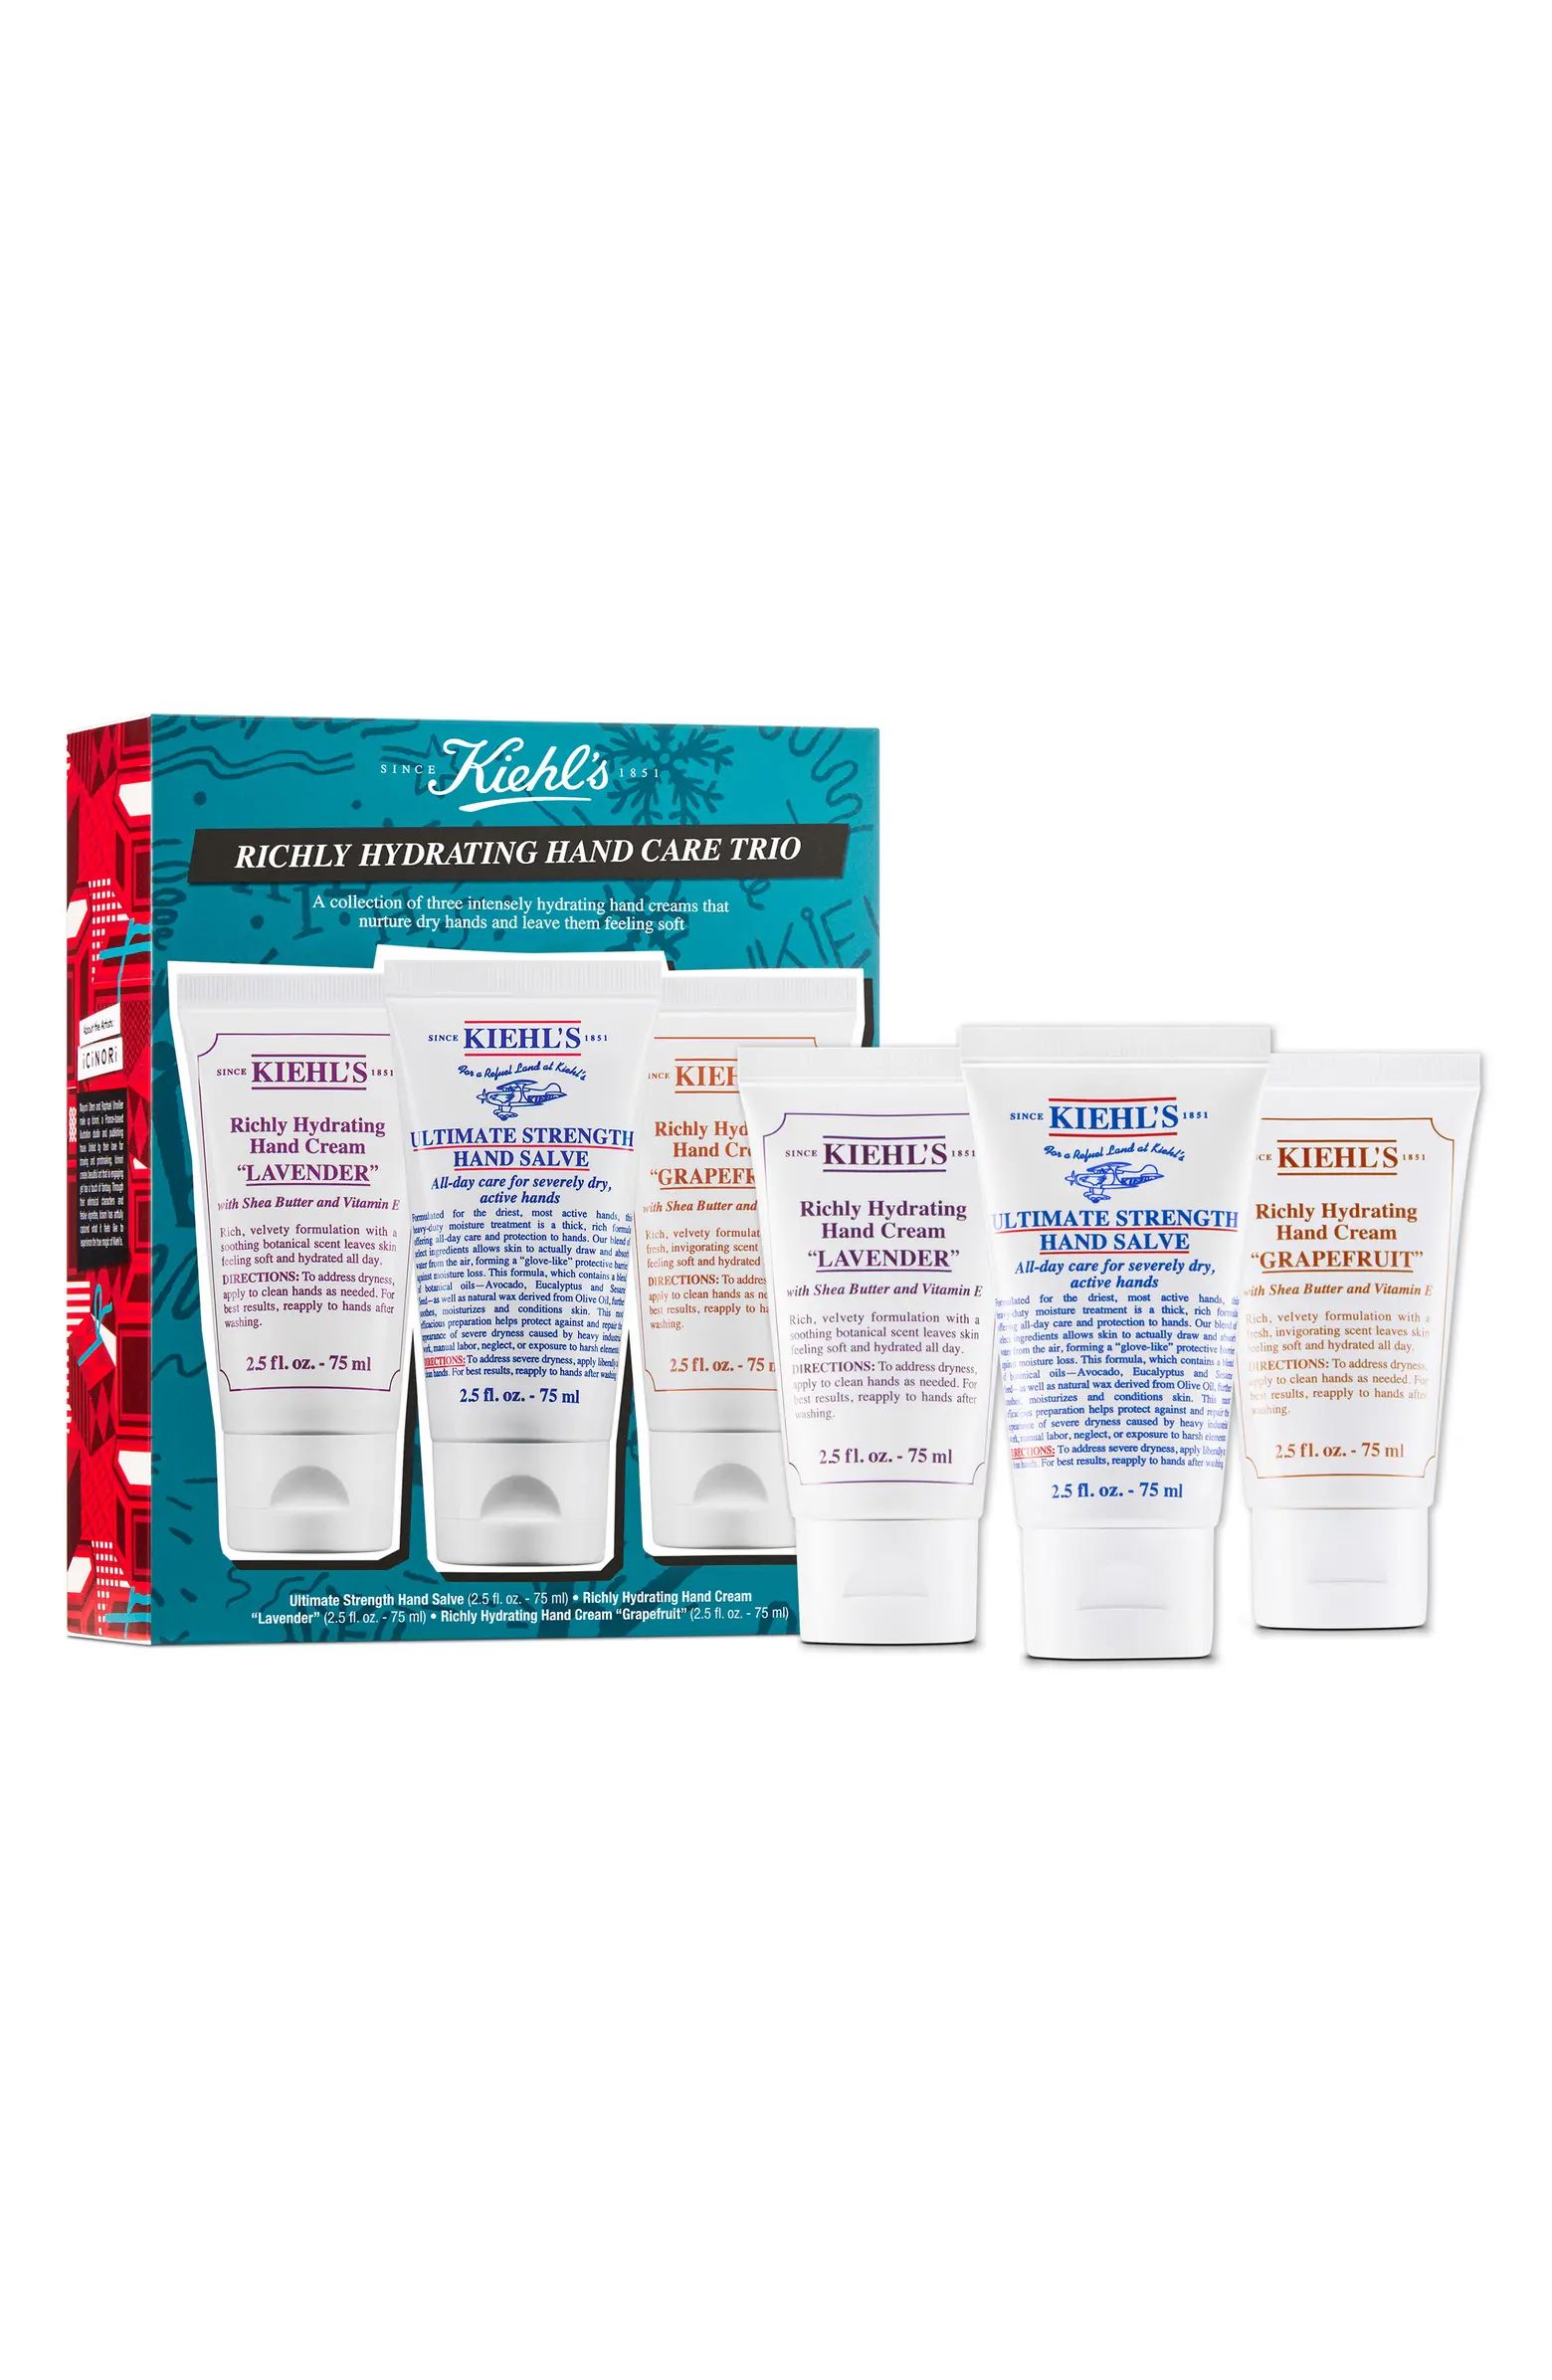 Kiehl's Since 1851 Richly Hydrating Hand Care Trio $58 Value | Nordstrom | Nordstrom